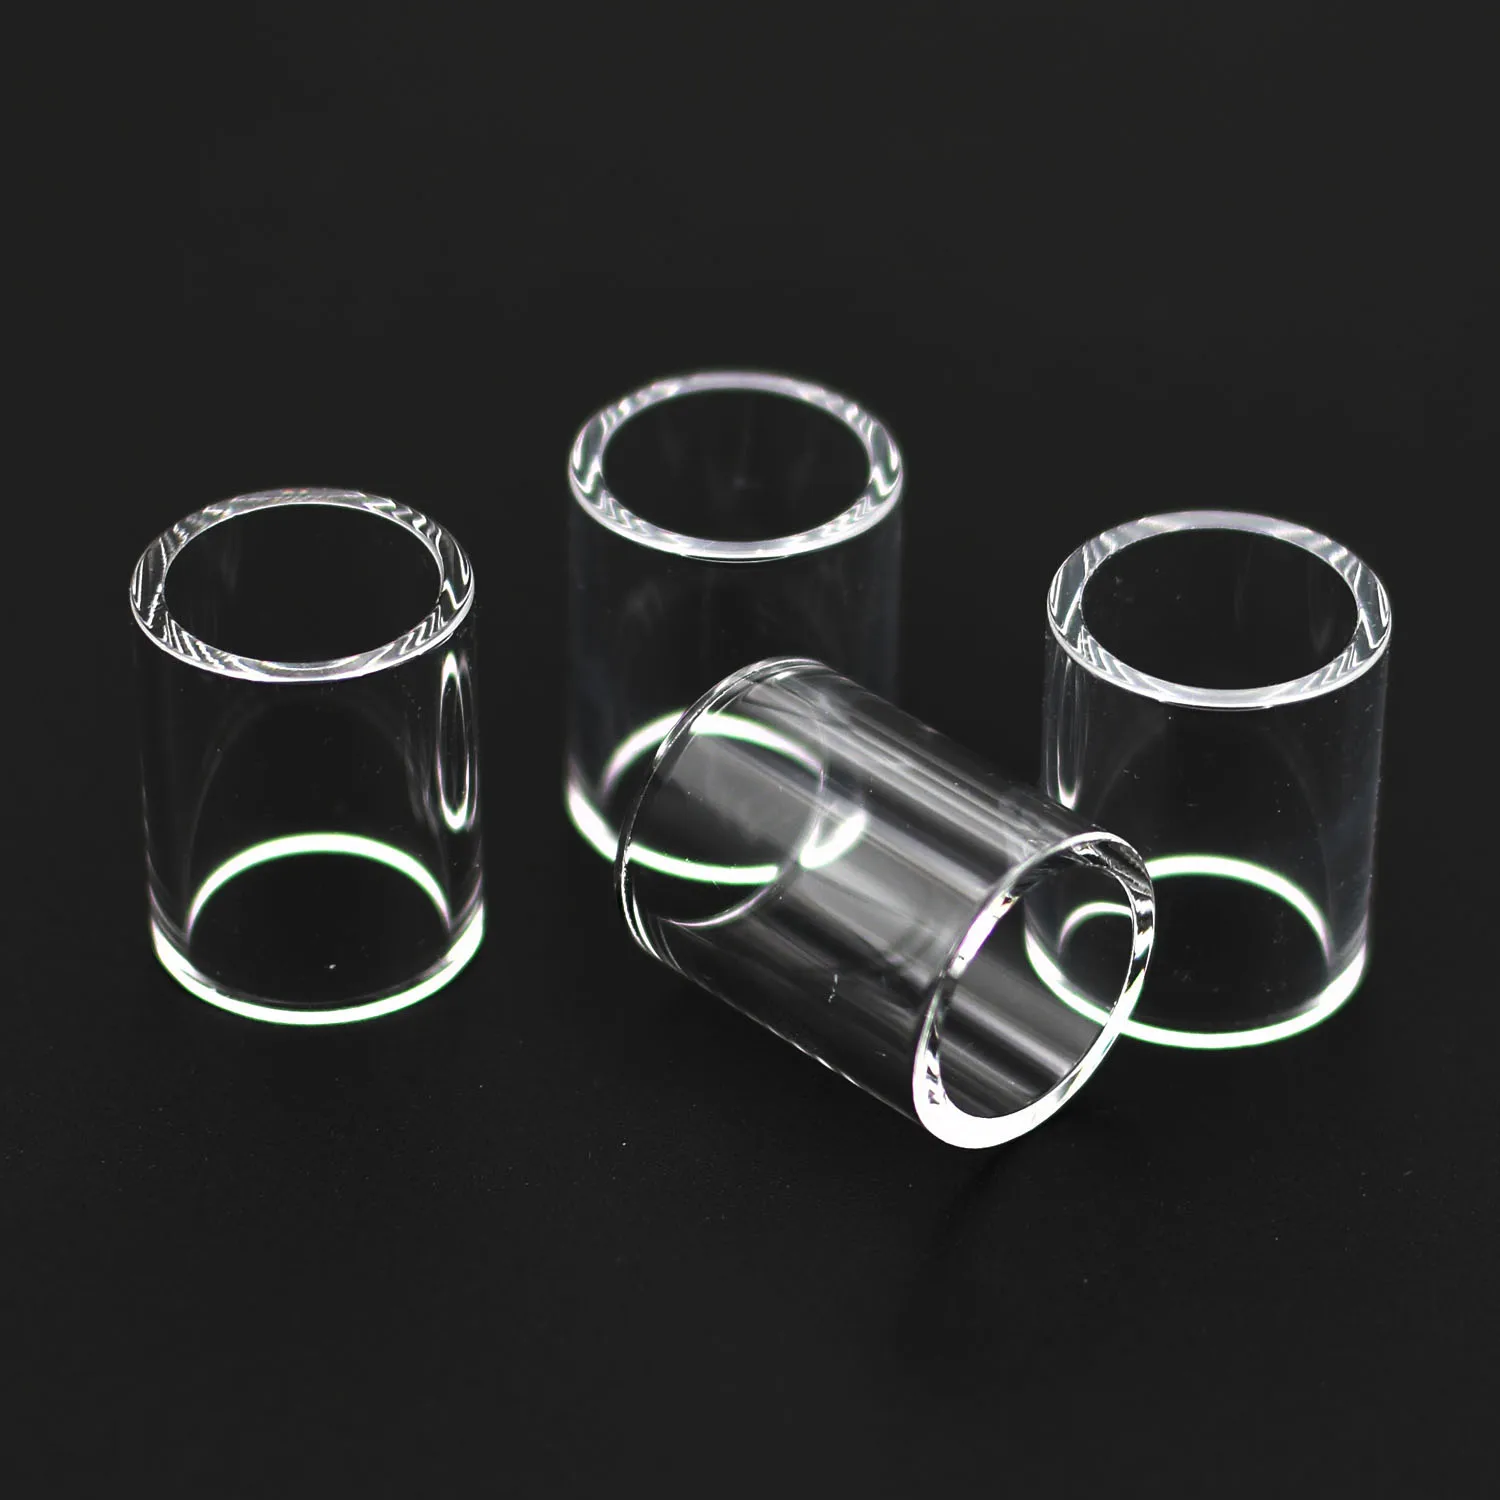 #10 Pyrex Glass Cup & Temperature Resistant O-Ring For WP-17/18/26 & WP- 9/20 TIG Welding Torch 30PCS gold solder paste Welding & Soldering Supplies